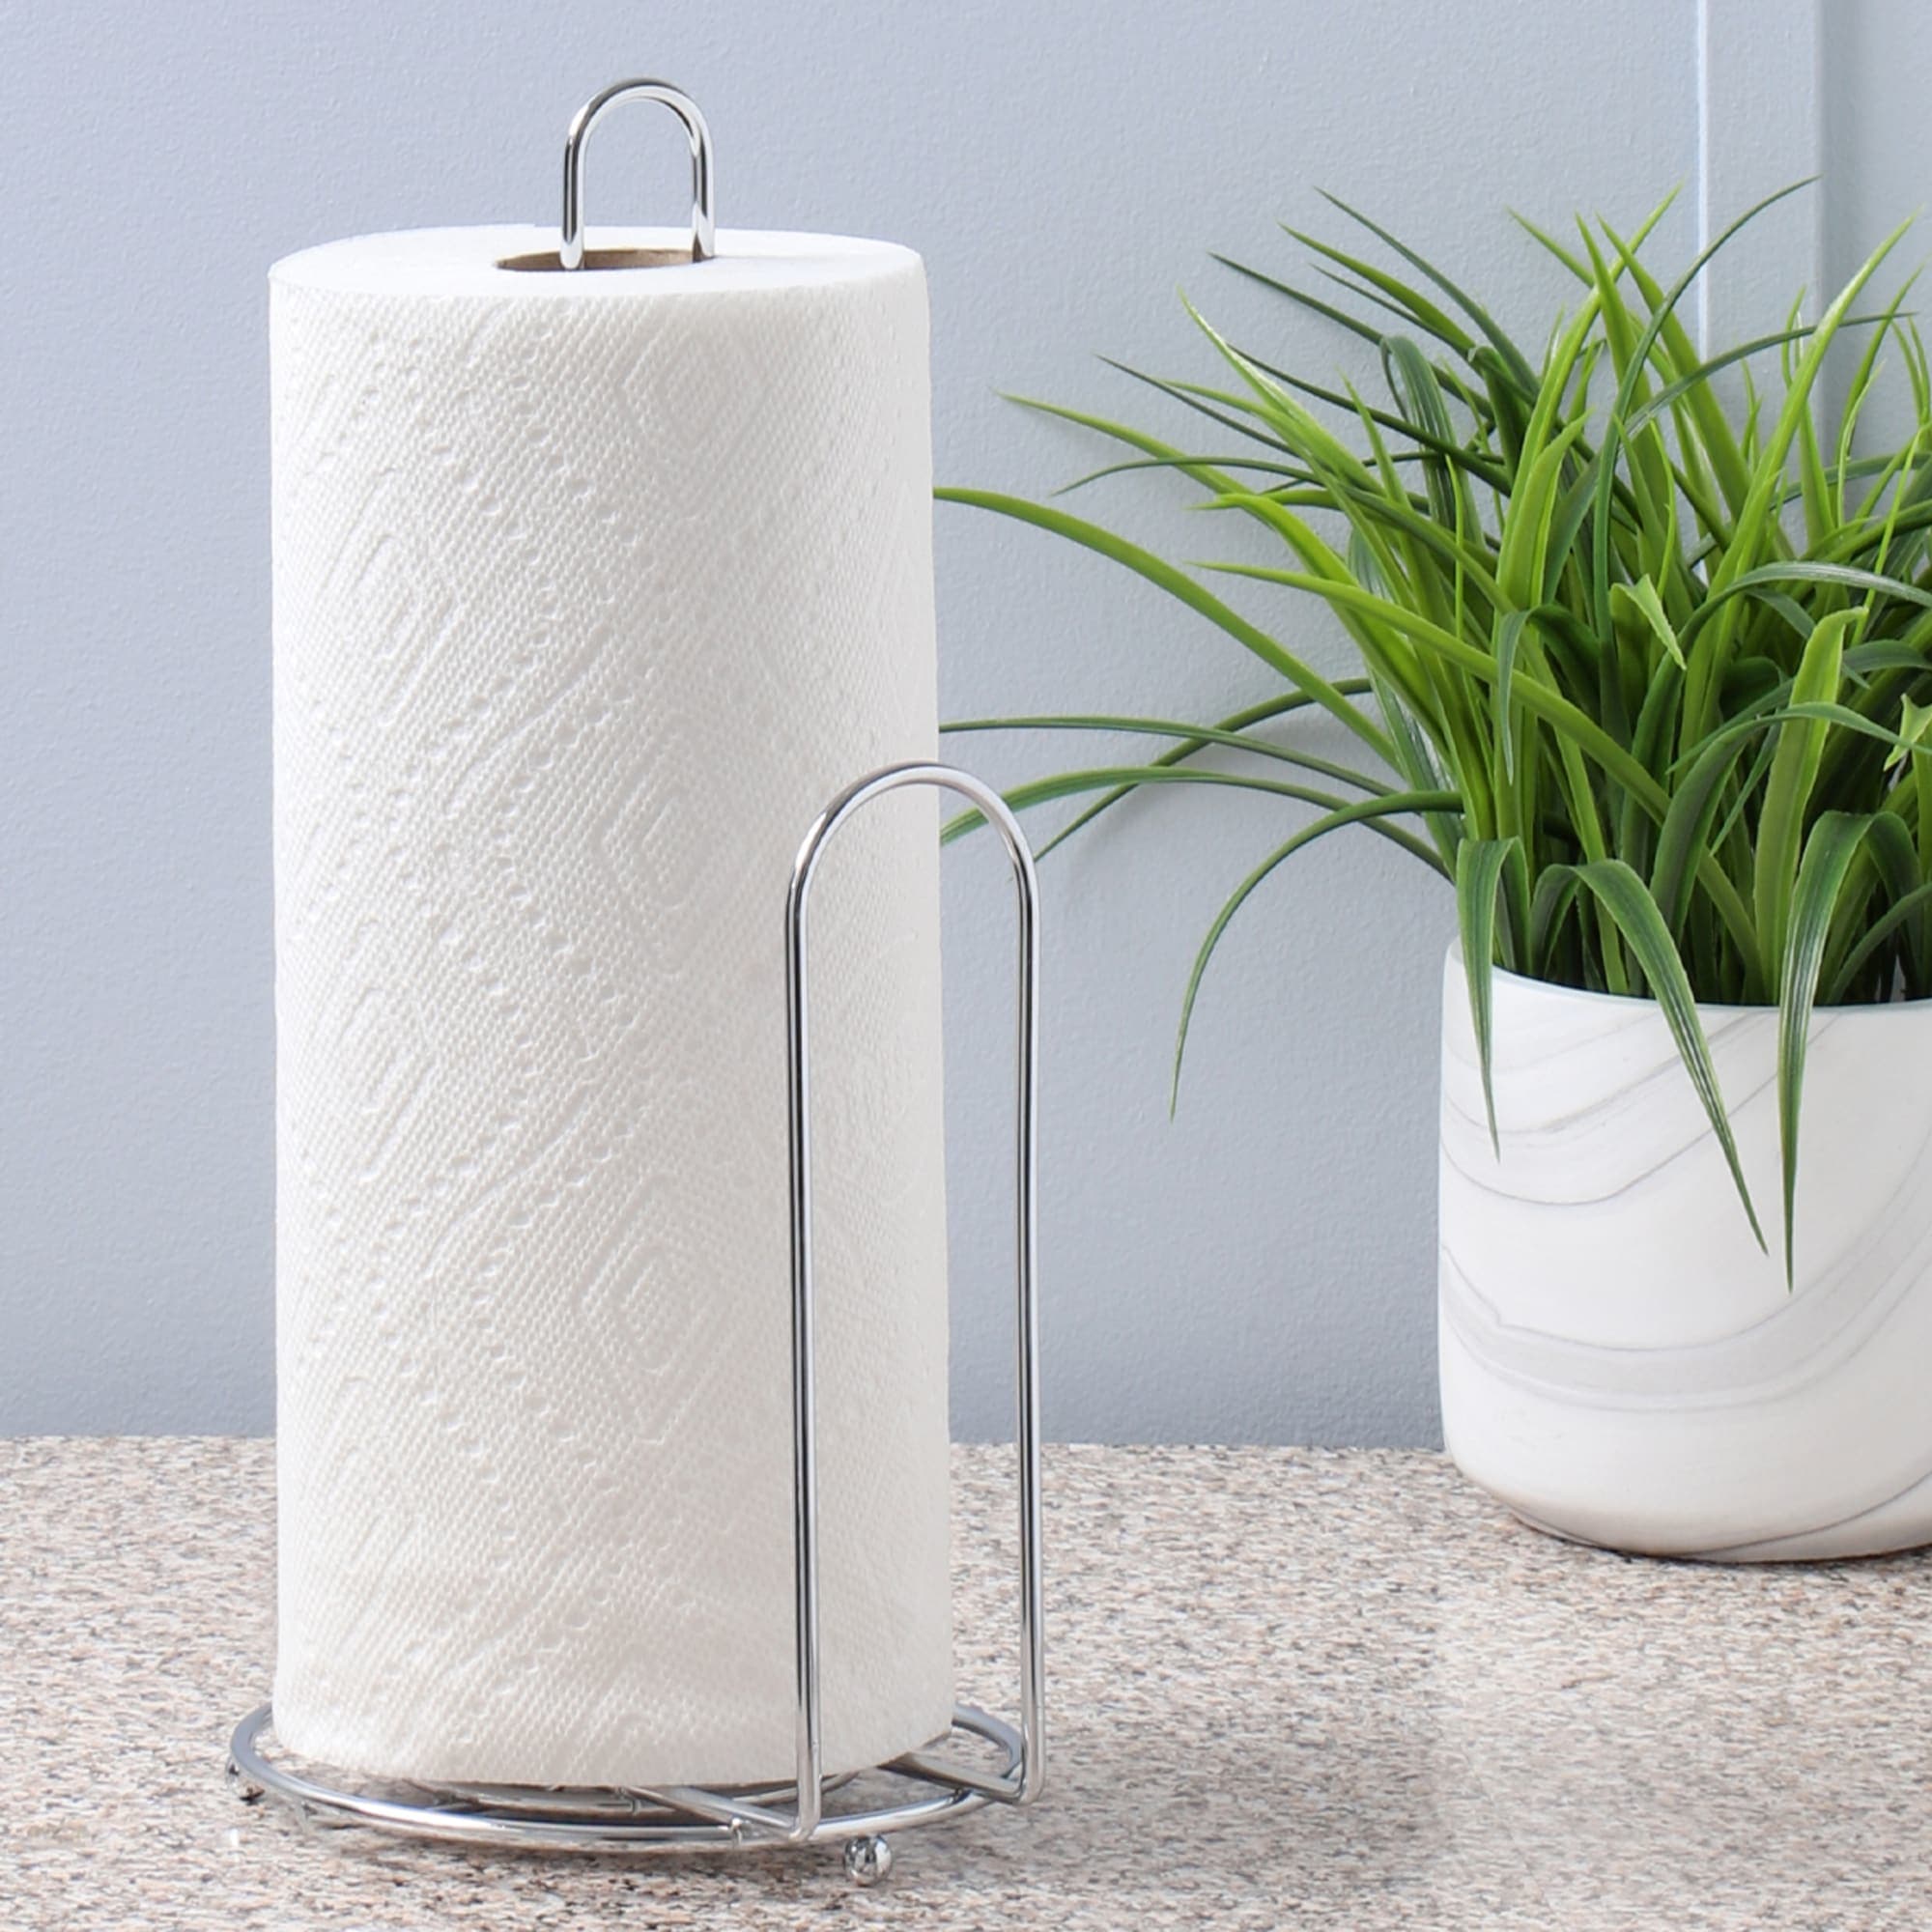 Stainless Steel Free-standing Paper Towel Holder